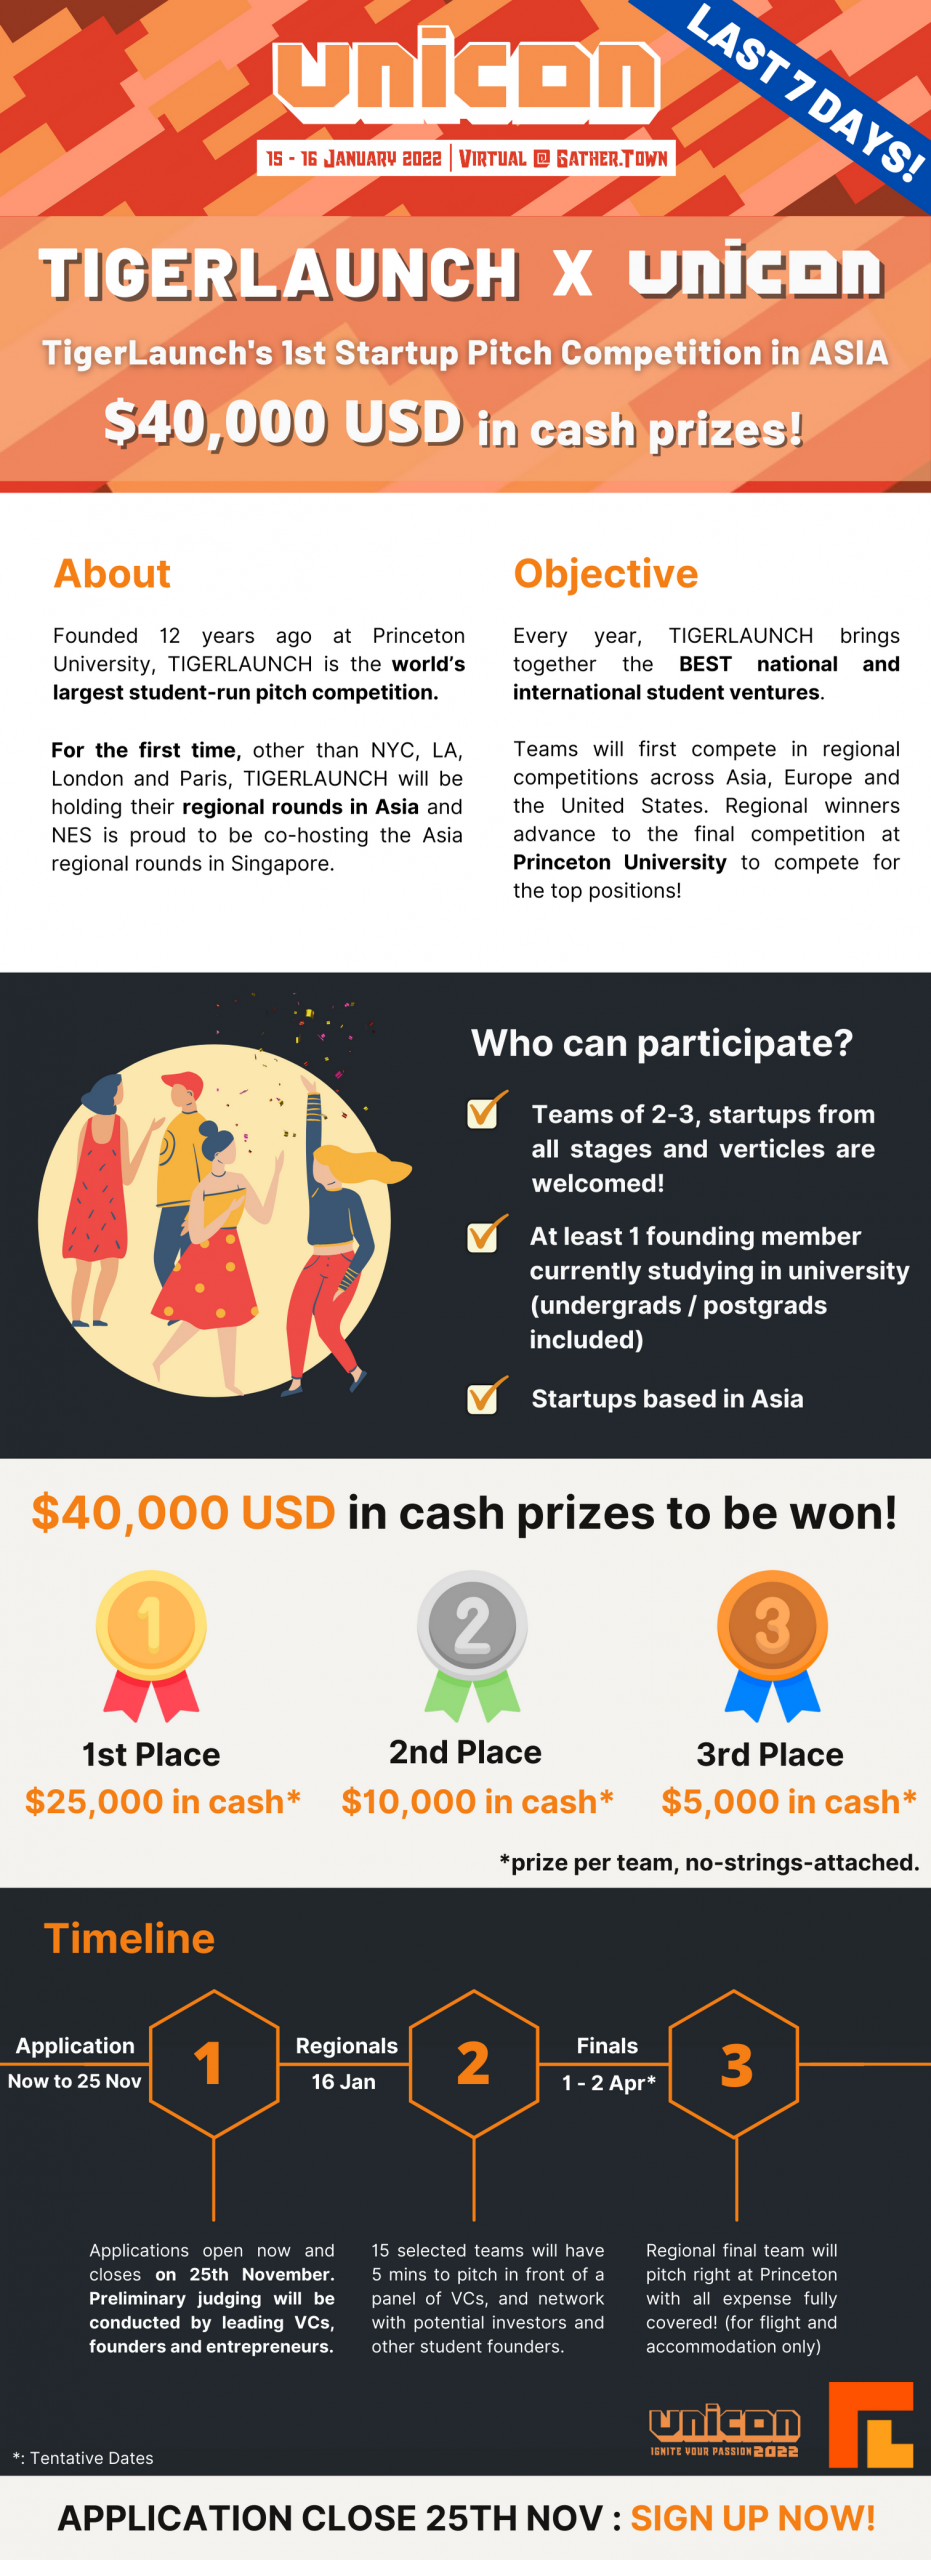 TIGERLAUNCH Competition, by NUS & Princeton